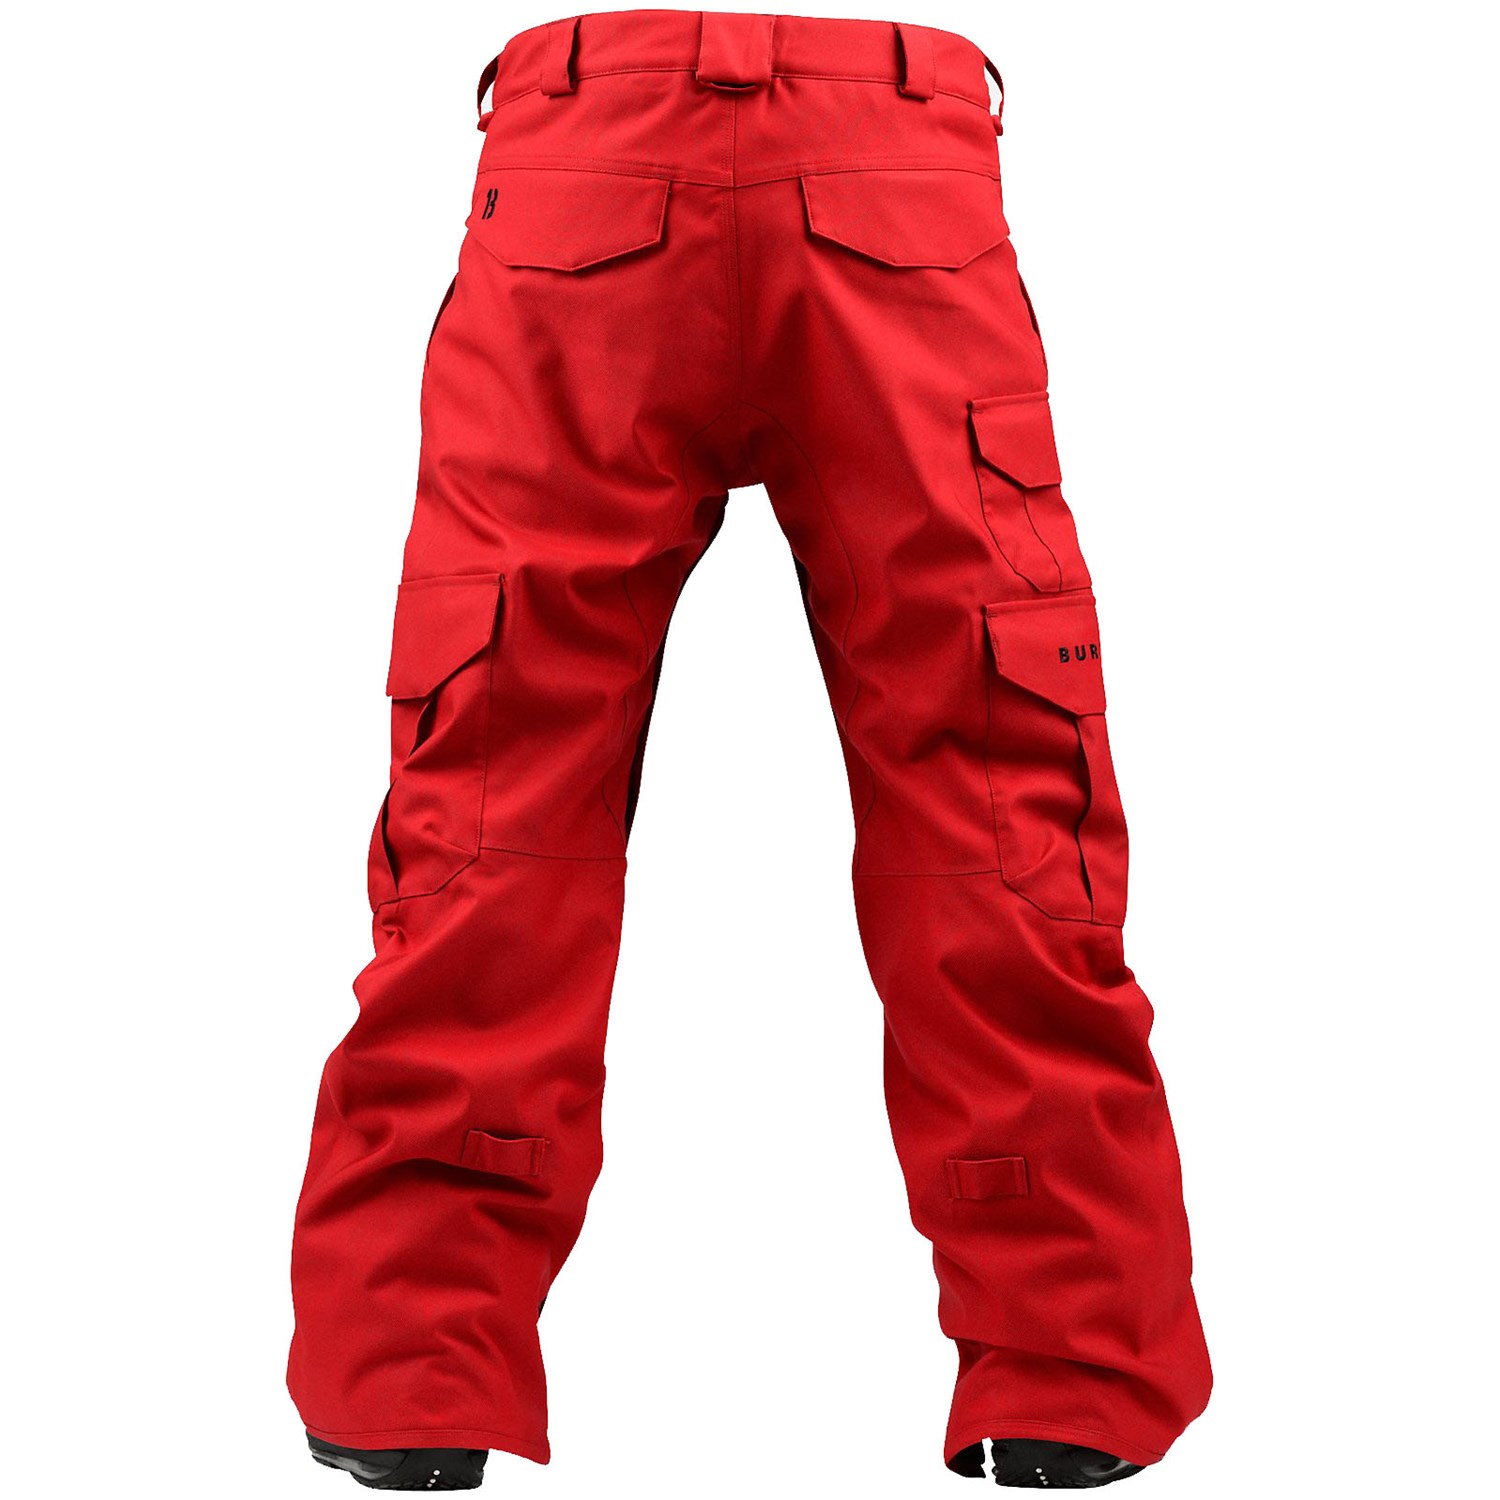 Top more than 84 red cargo pants mens super hot - in.eteachers